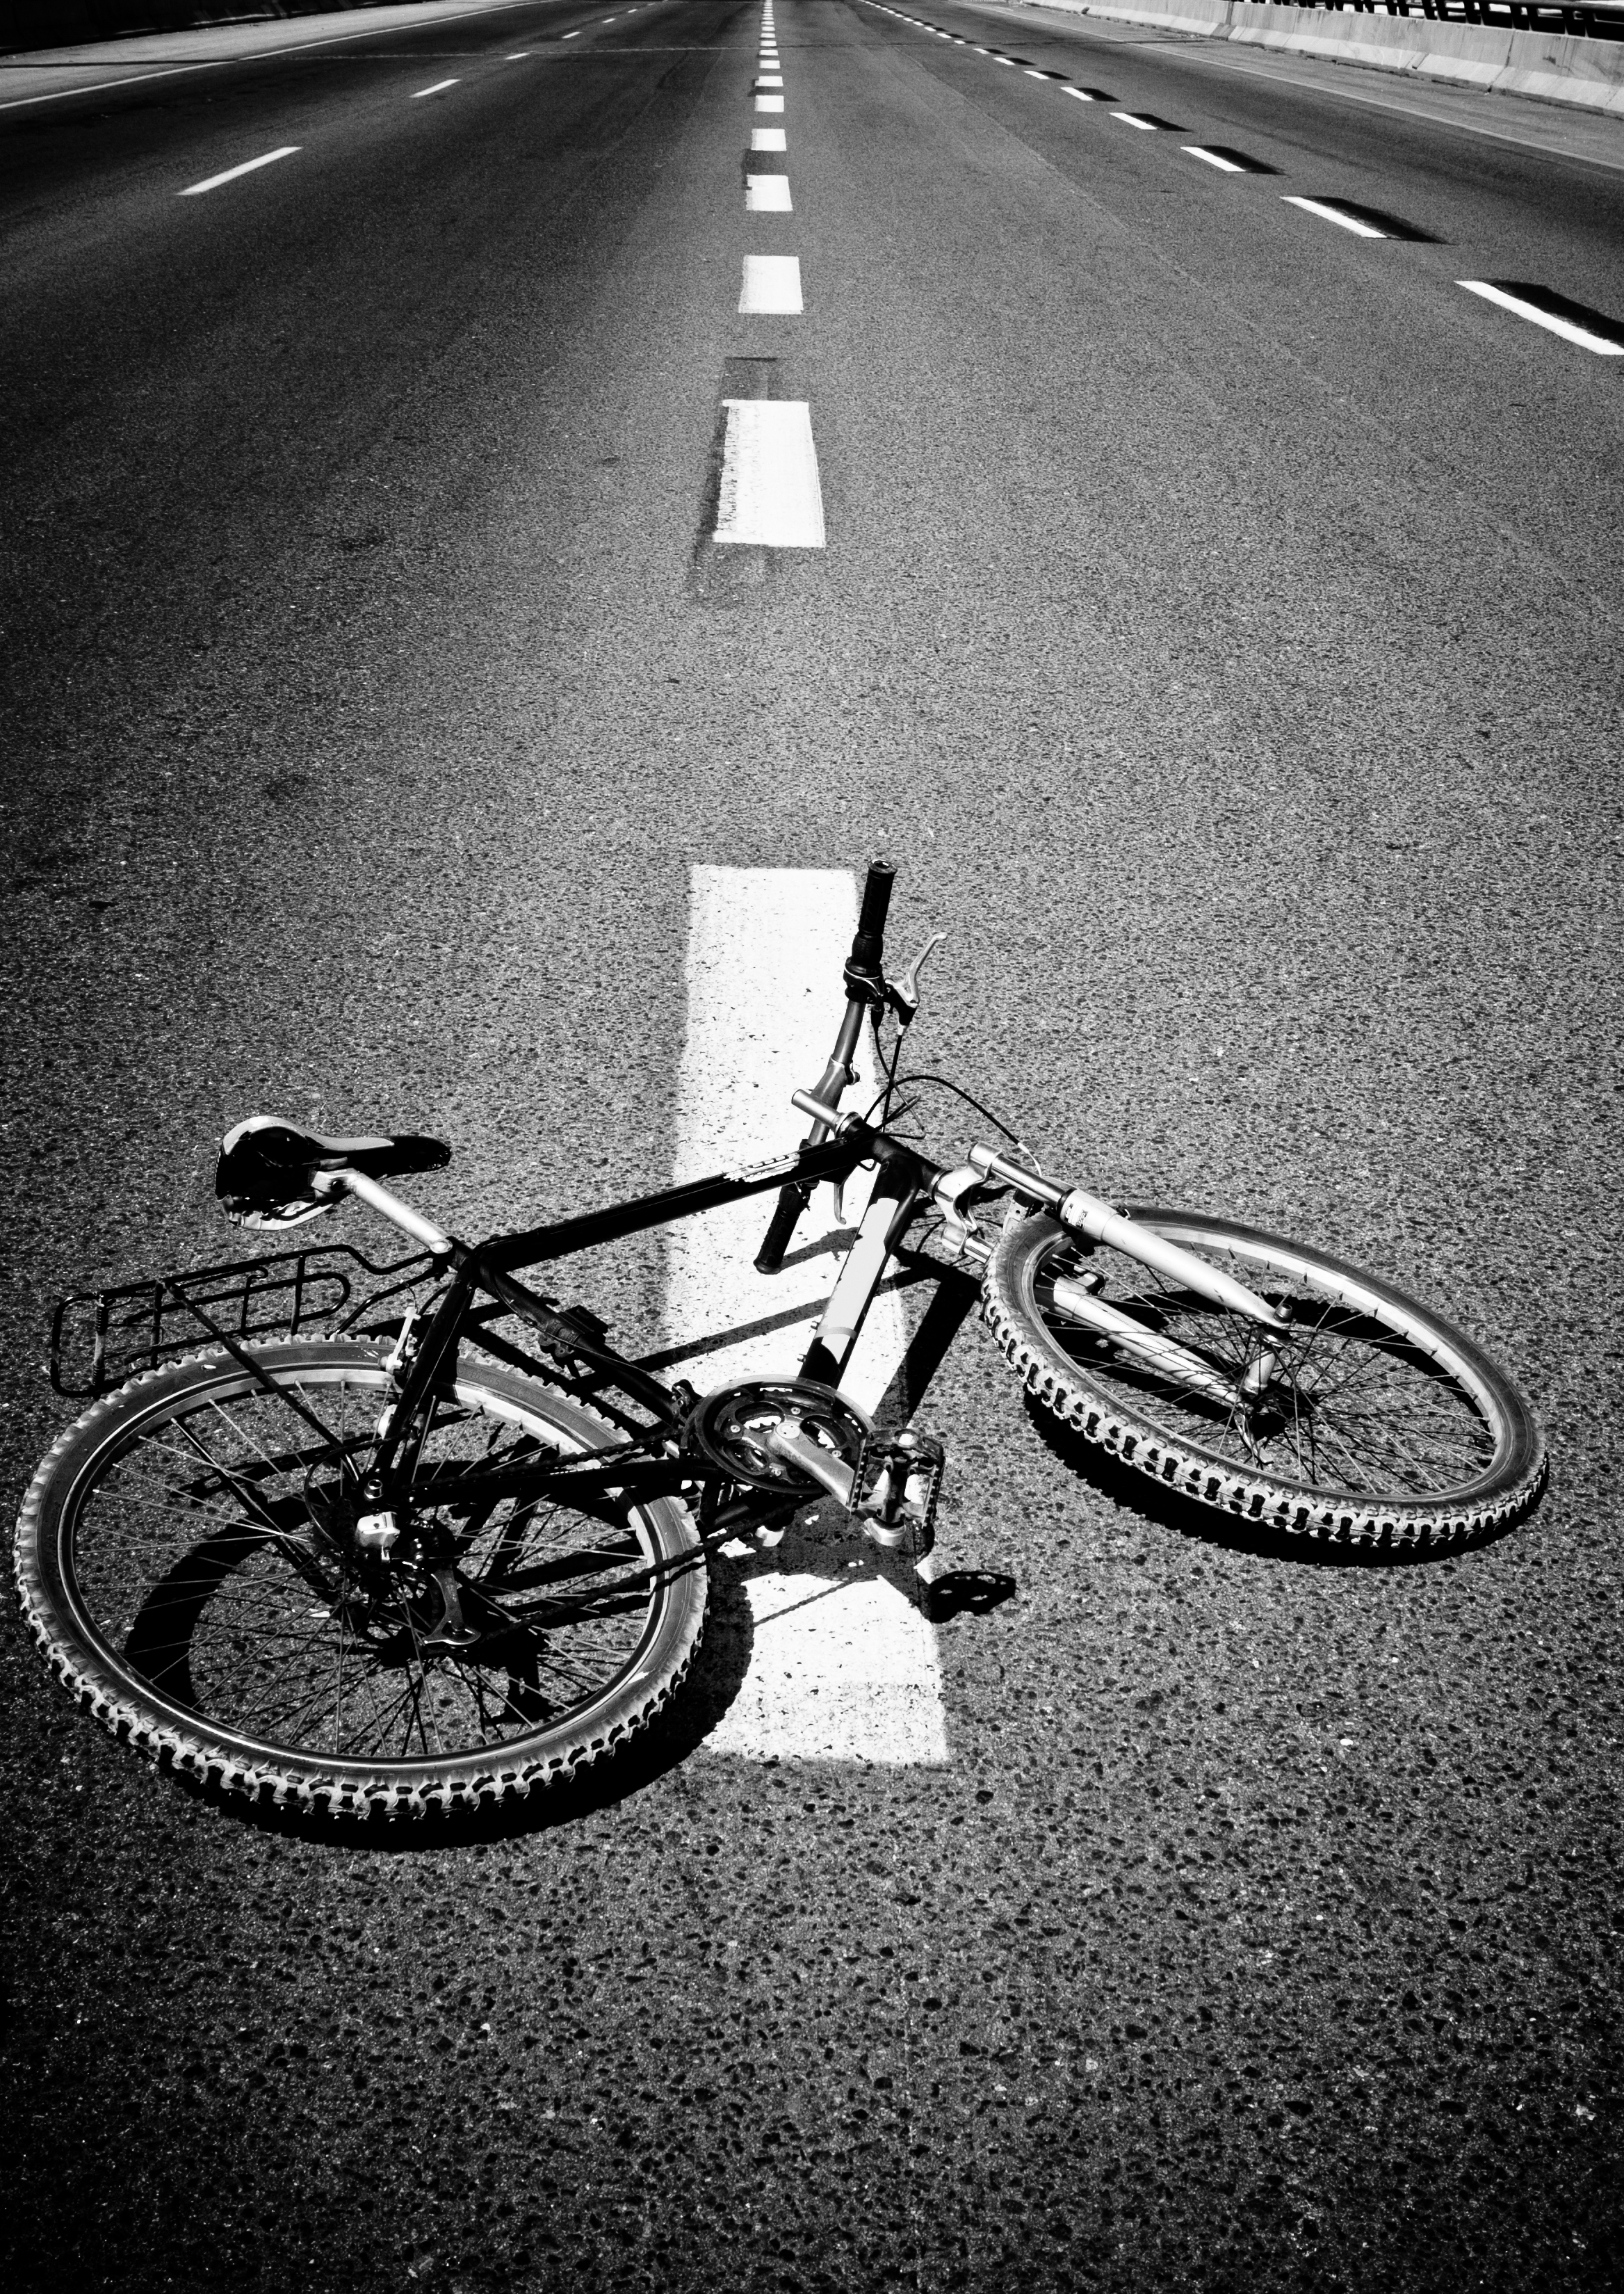 Are Bicycle Accident Rates Declining in Austin?